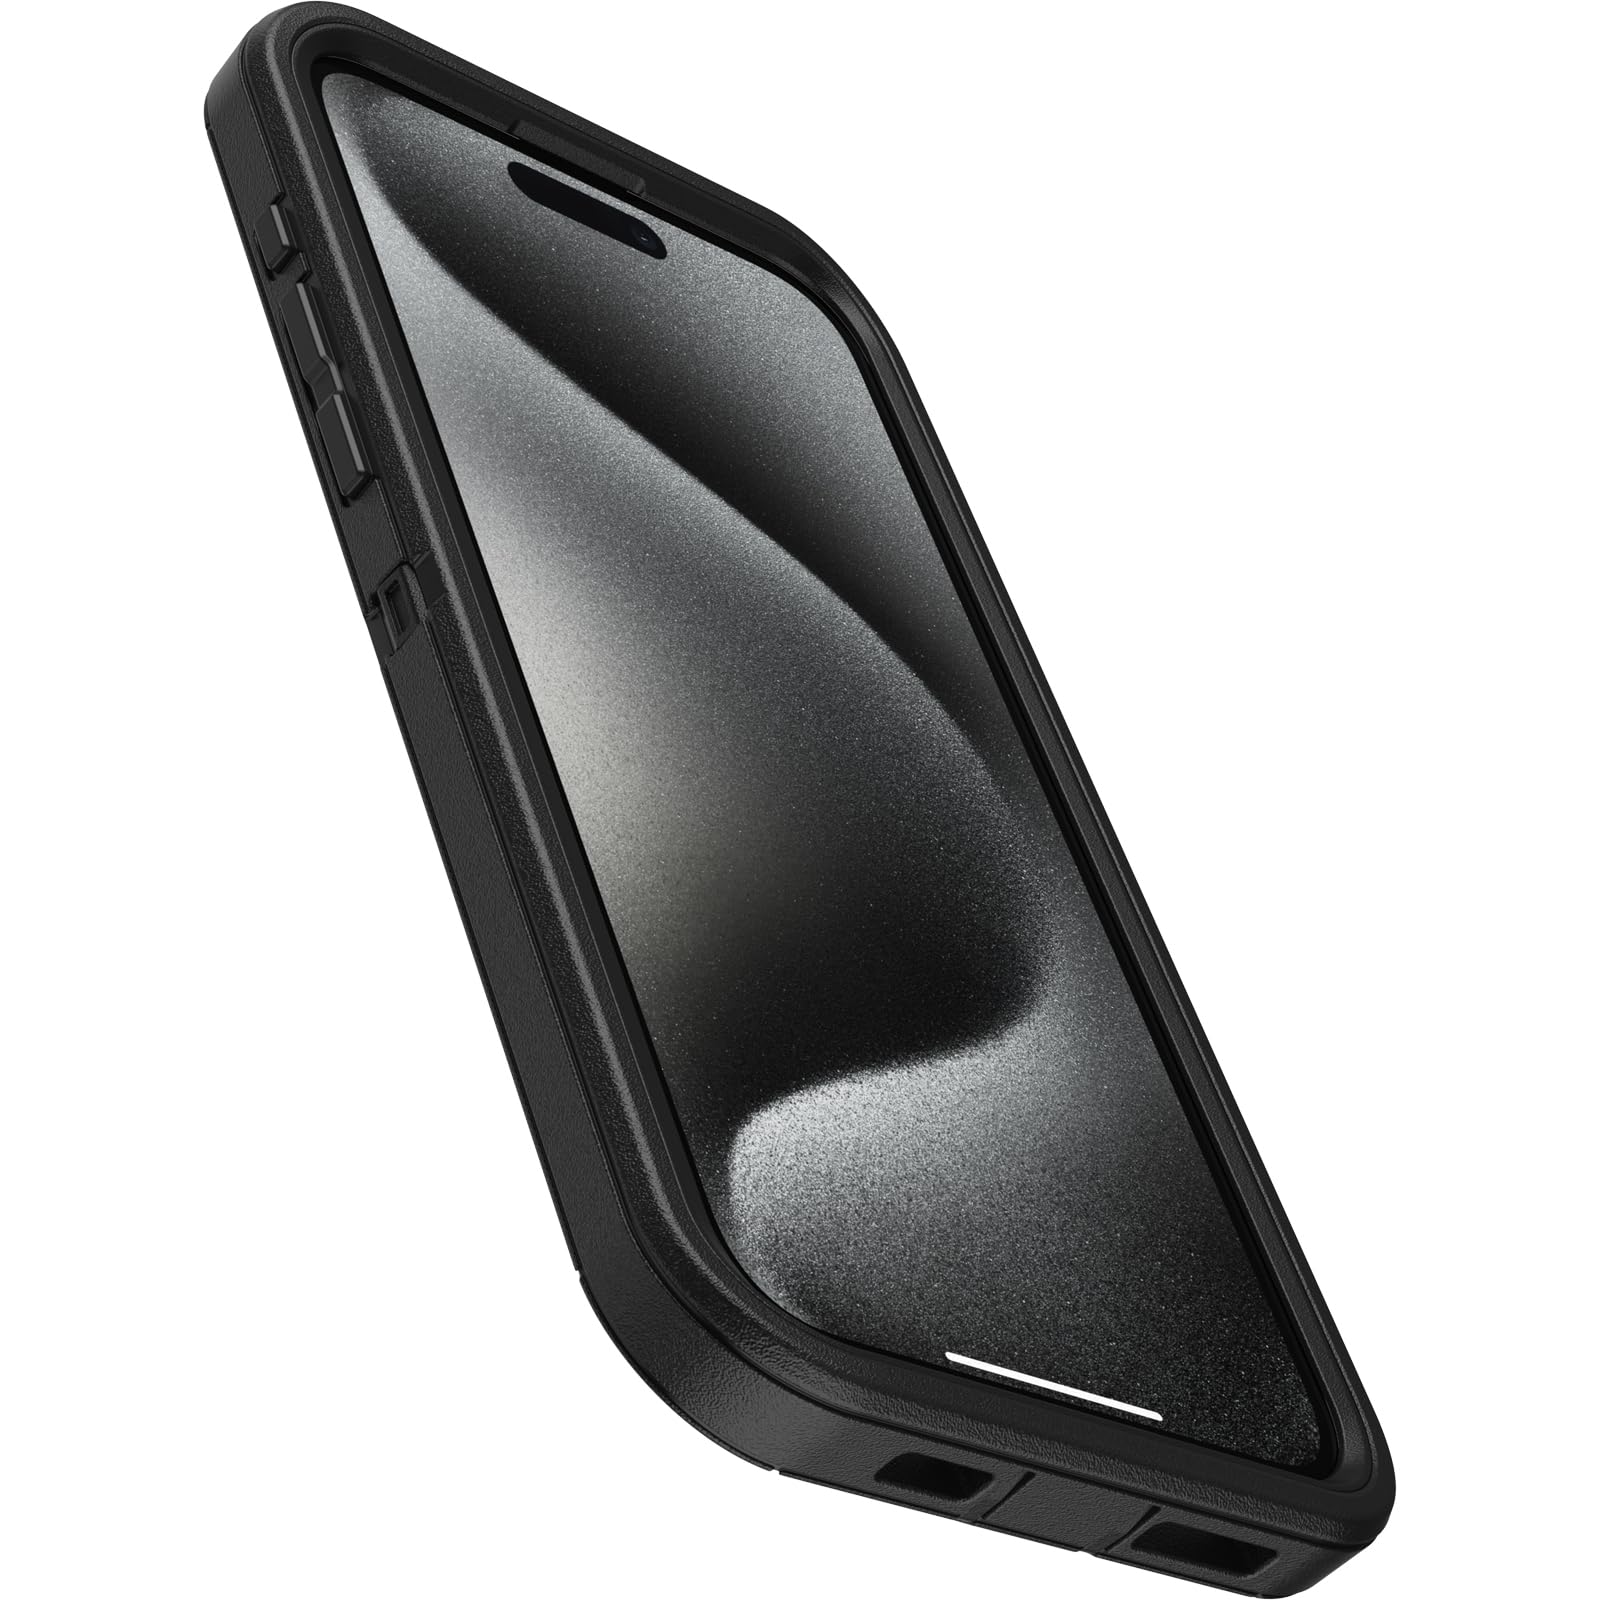 OtterBox iPhone 15 Pro MAX (Only) Defender Series Case - BLACK, screenless, rugged & durable, with port protection, includes holster clip kickstand (ships in polybag, ideal for business customers)